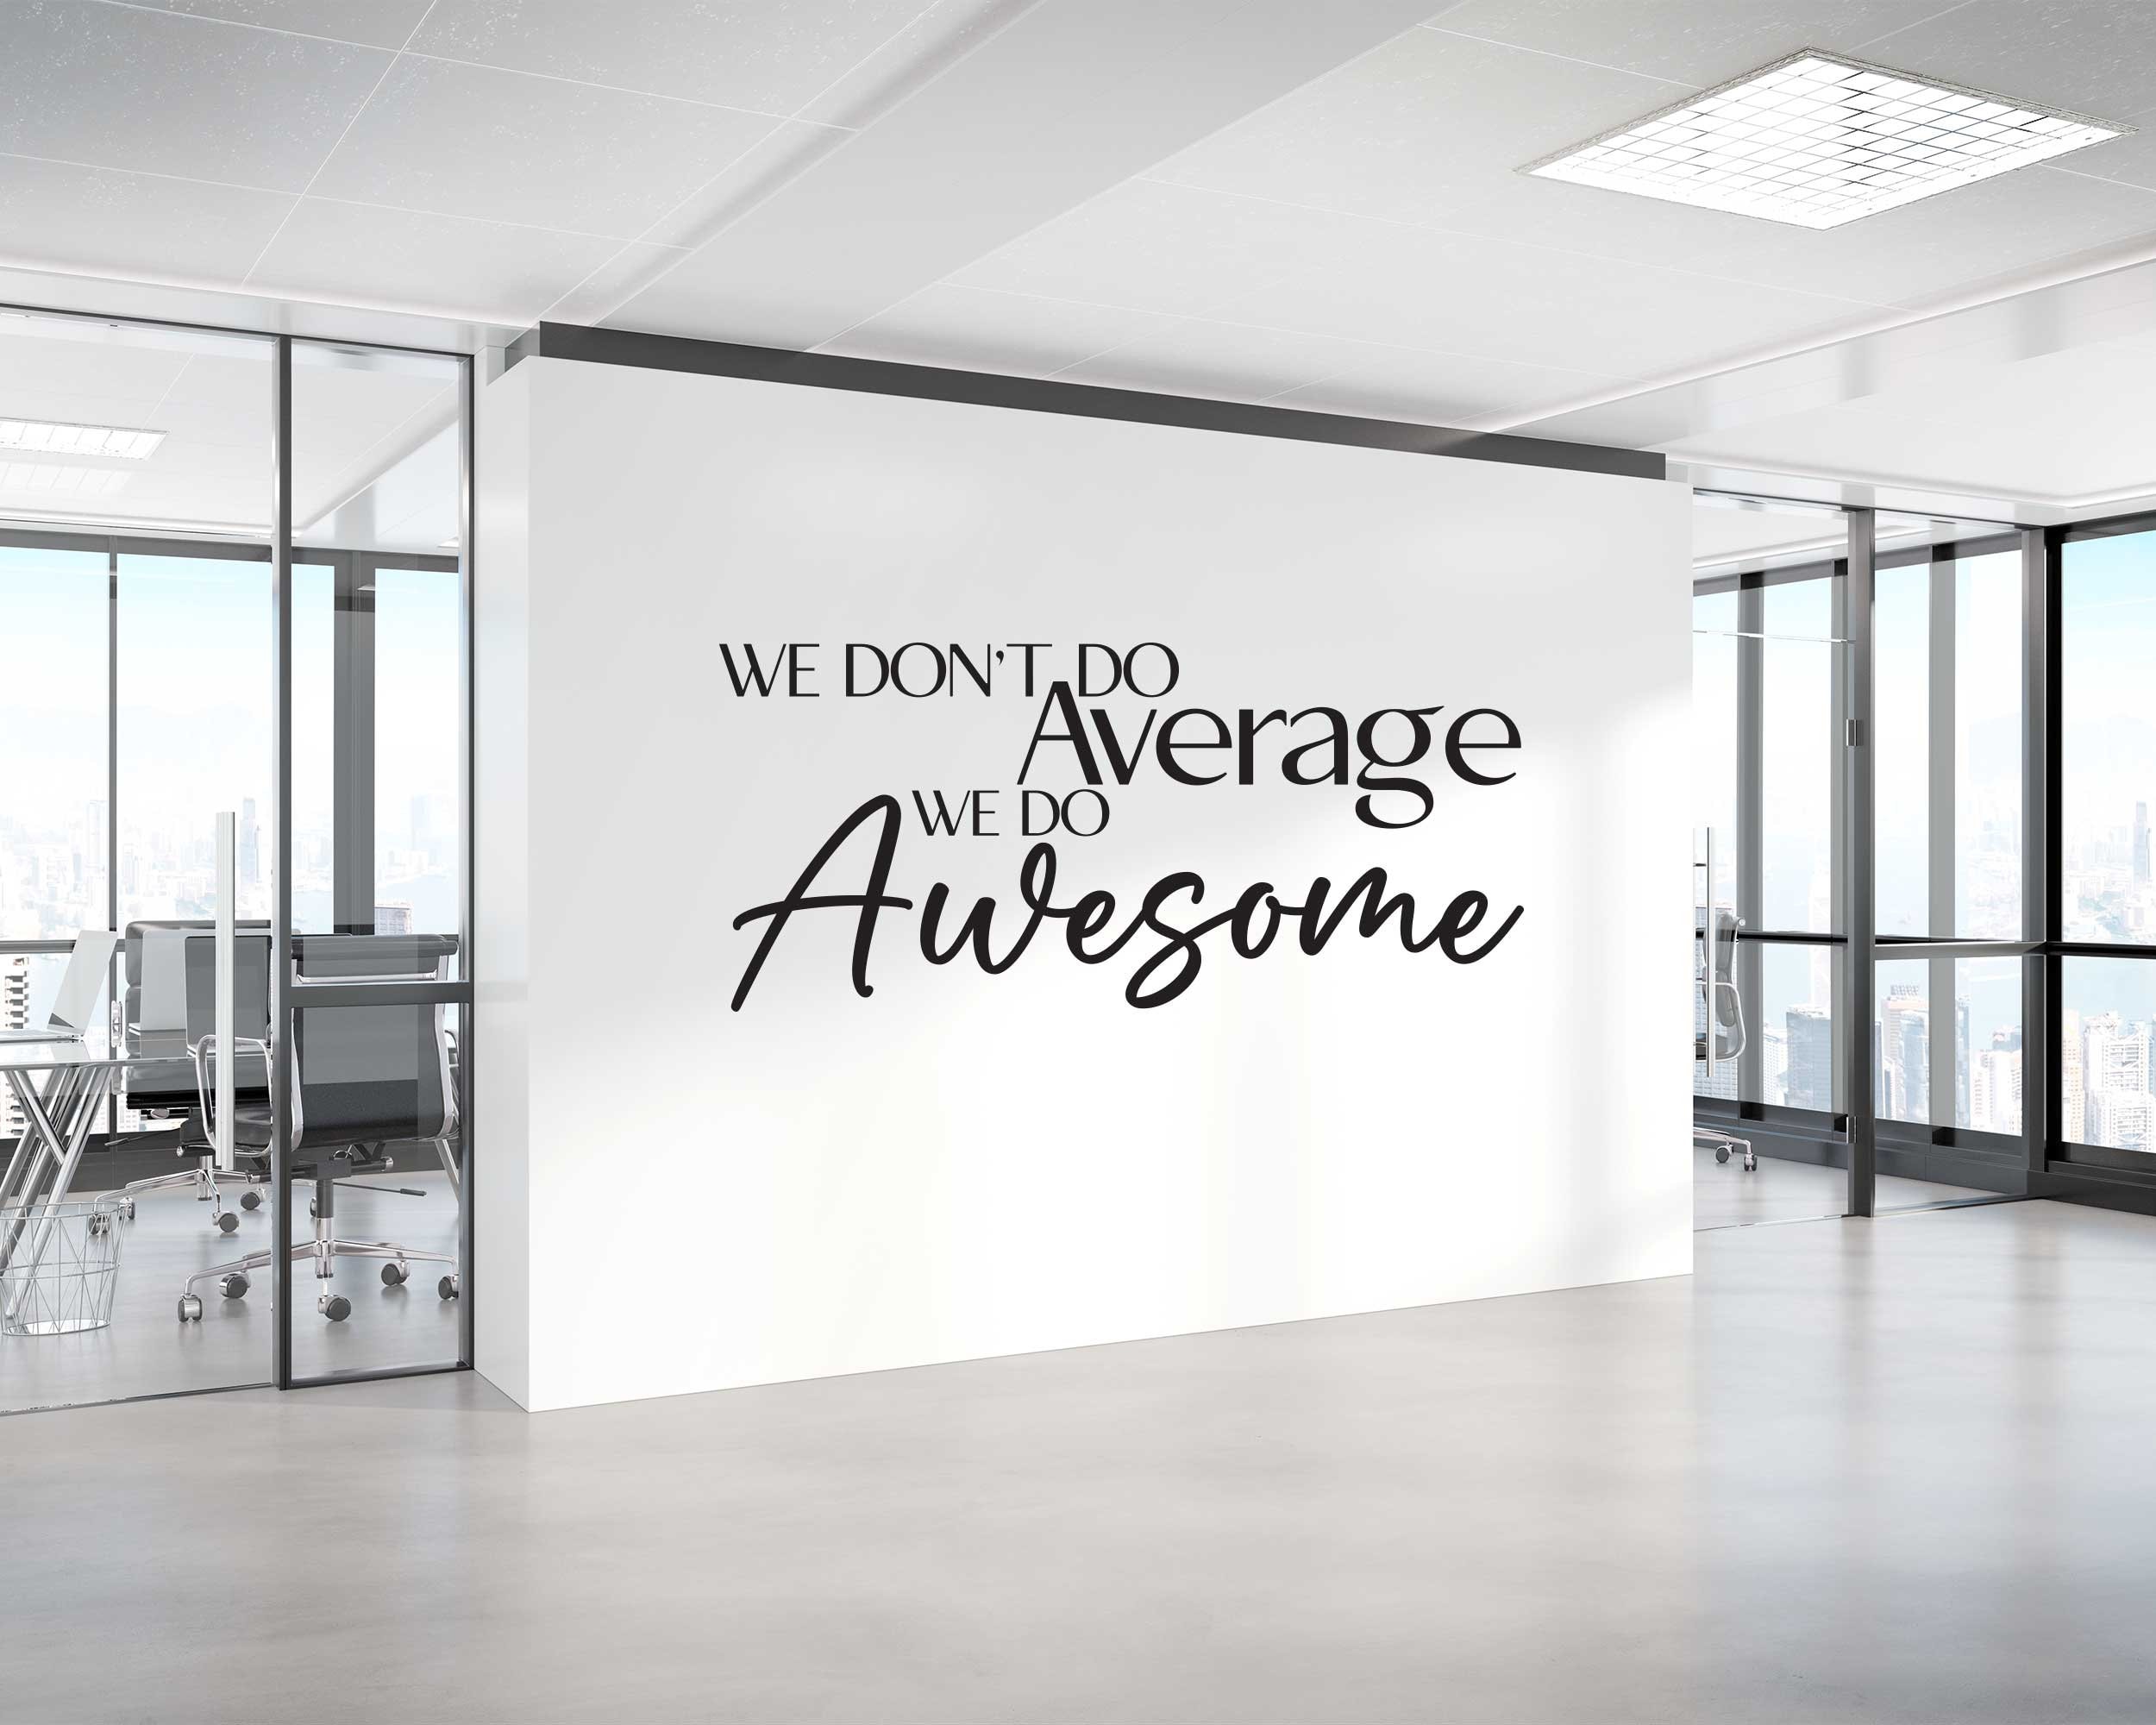 BIG OFFICE Wall Vinyl Decal we Don't to Average, We Do Awesome  Motivational, Inspirational Textual Decal 